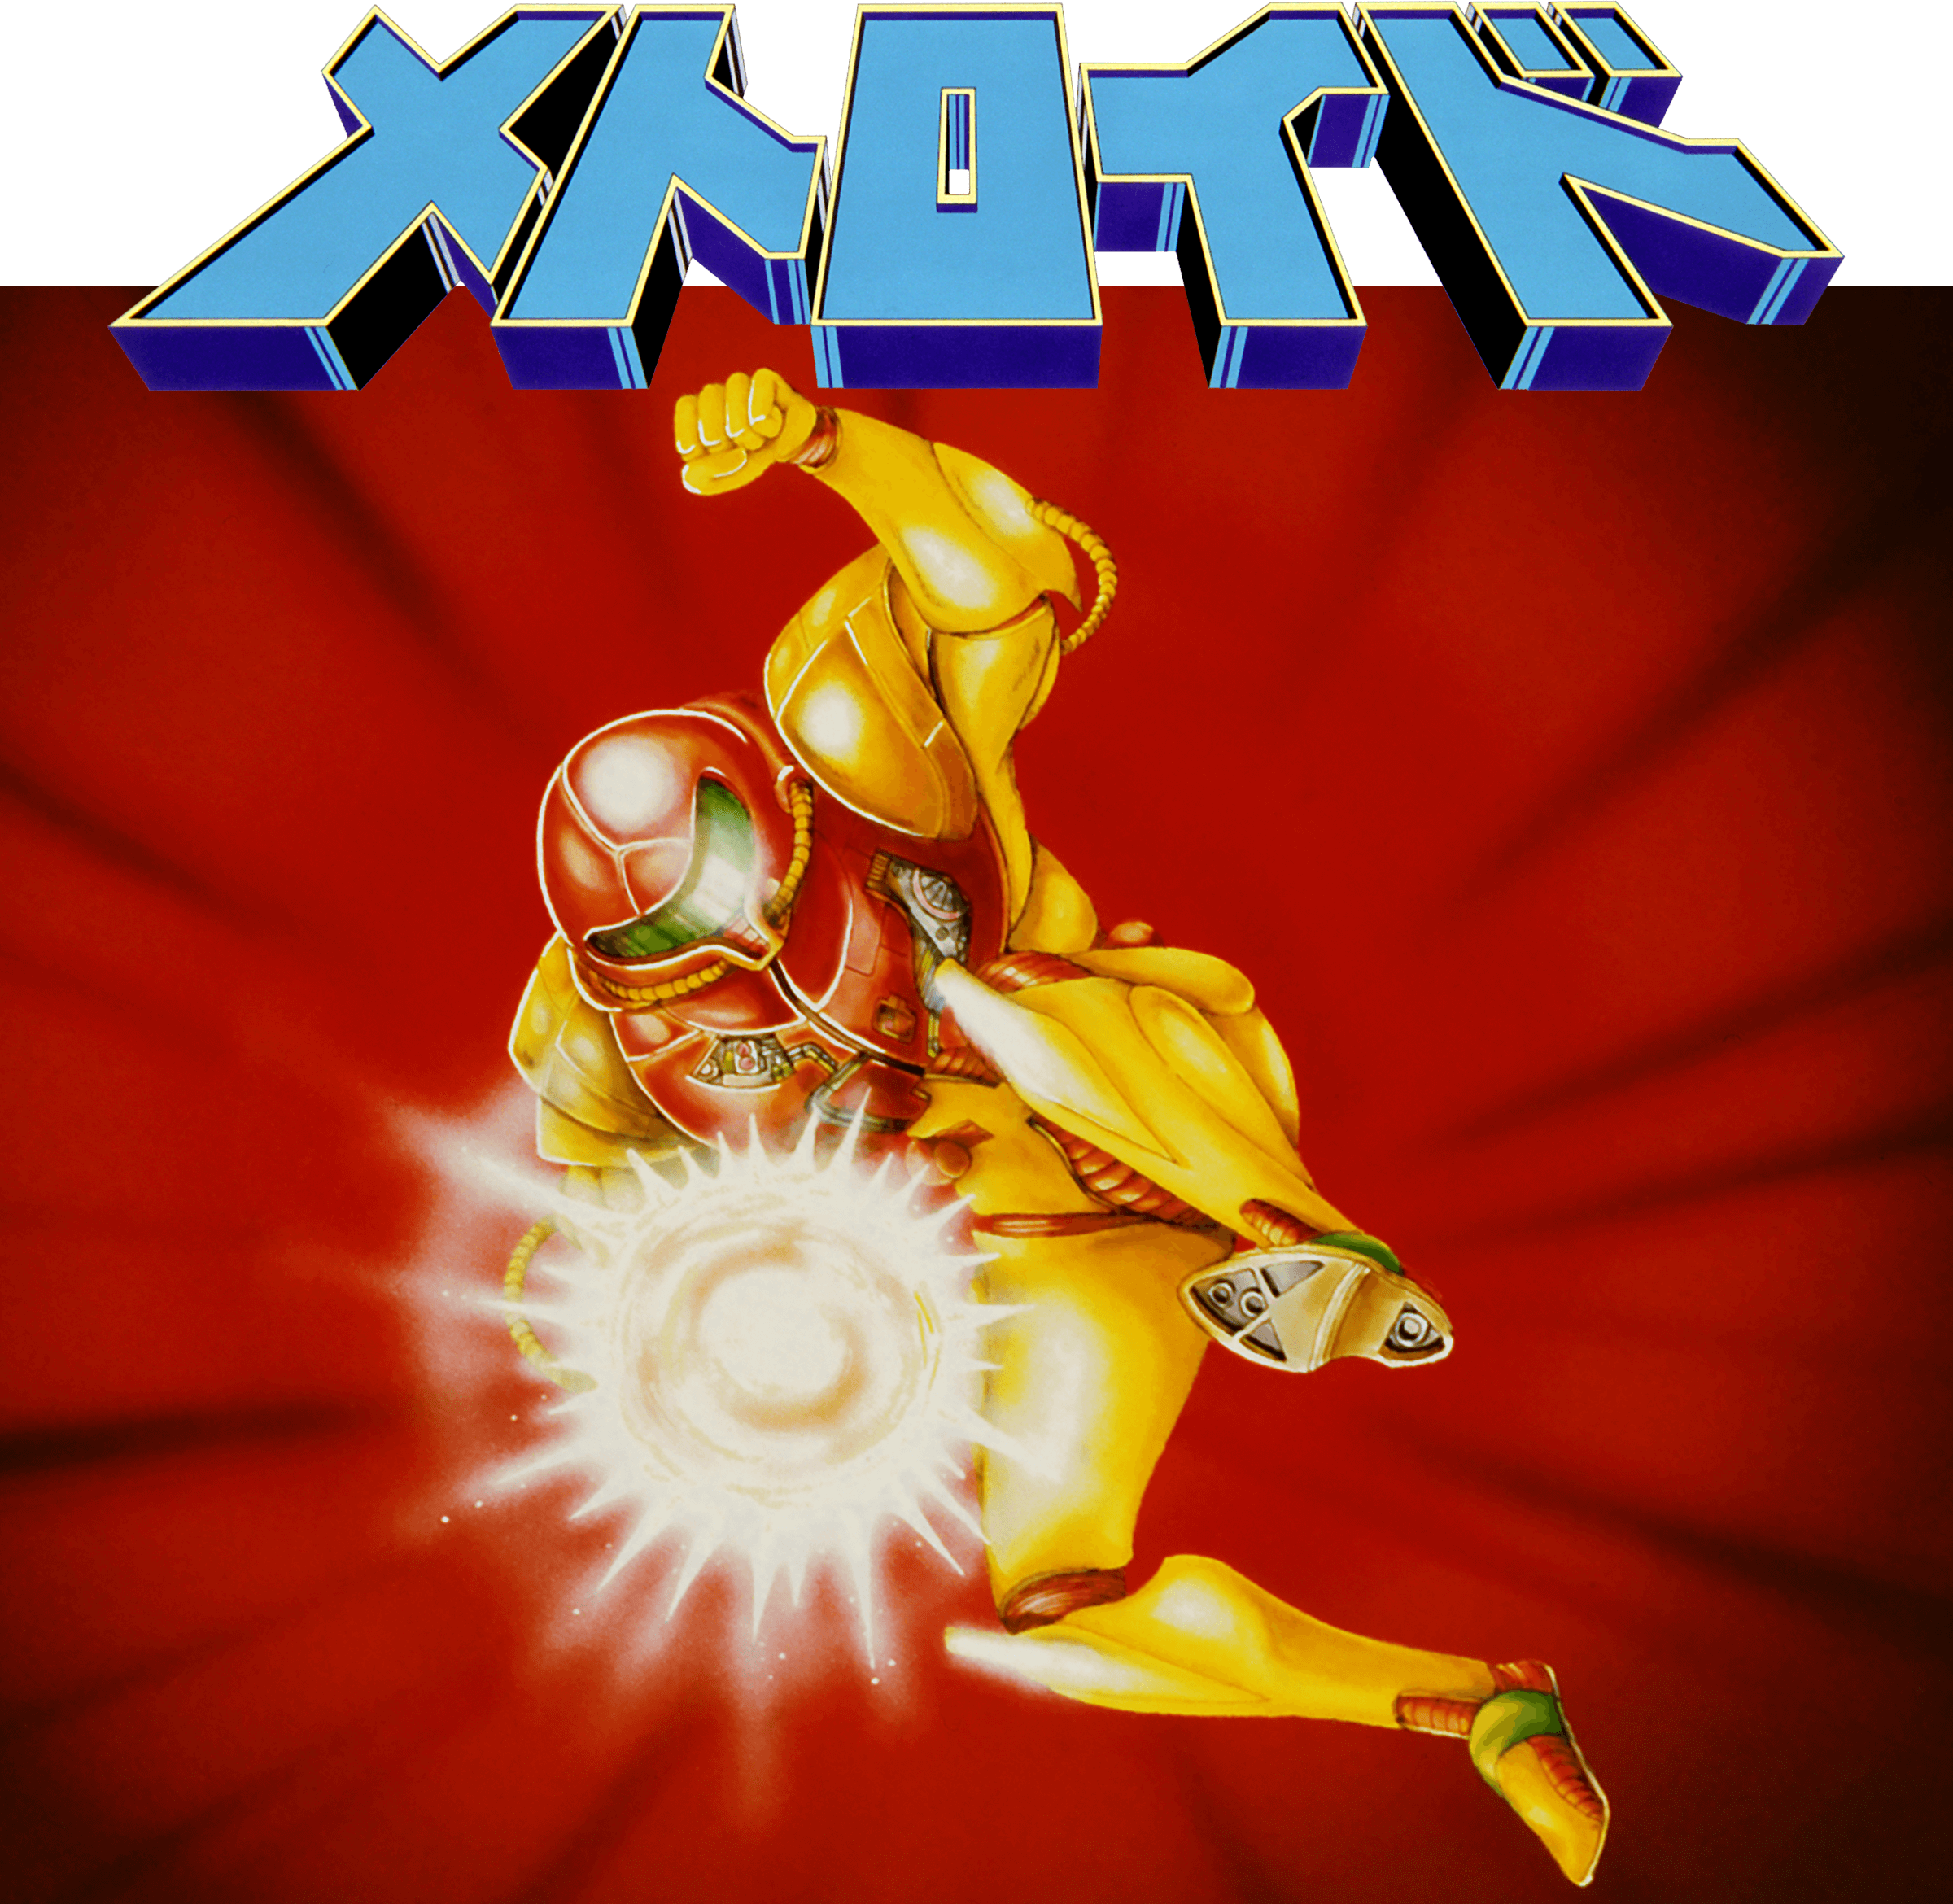 Promotional art for Metroid on the Famicom.